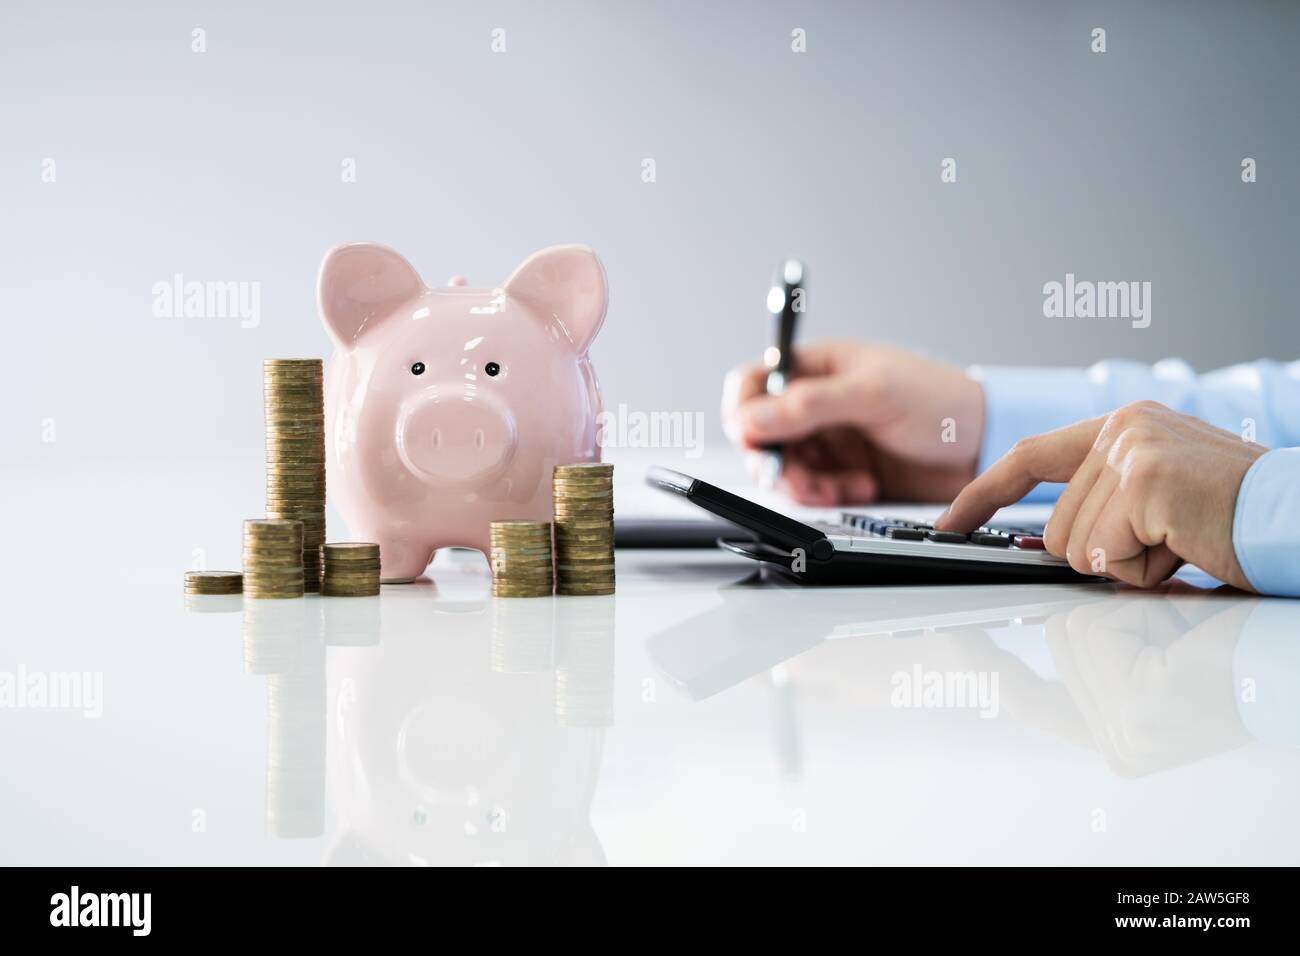 Man Calculating Savings And Costs. Side View Stock Photo